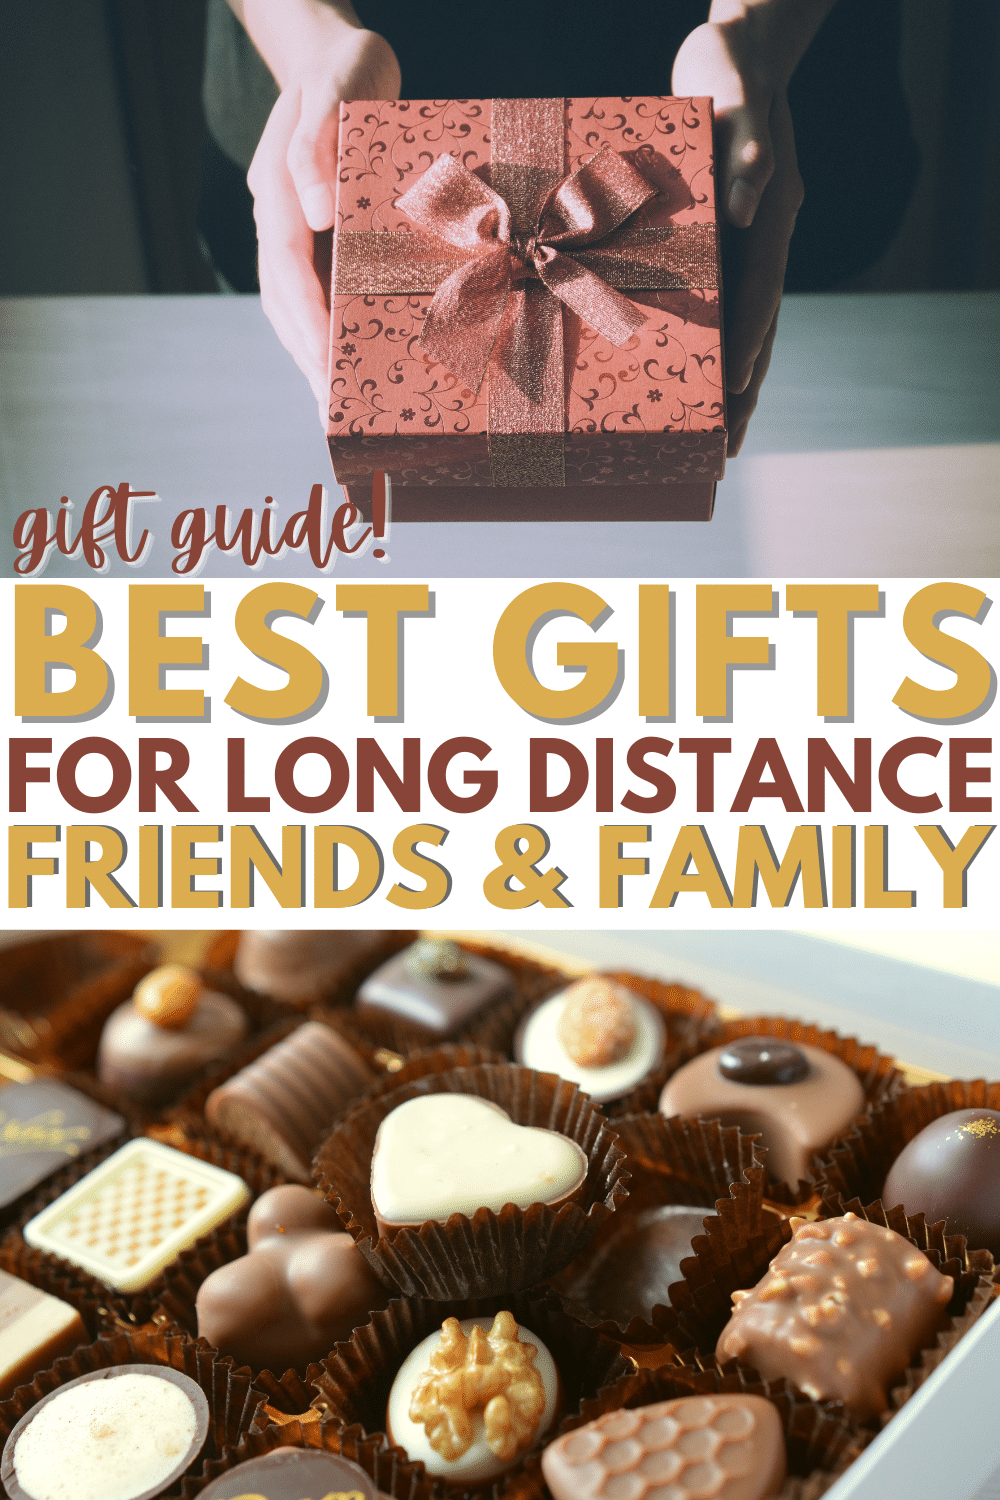 If you live far from friends or family & want to send a gift, the shipping costs are crazy! So, here's the best gifts for long-distance friends and family. #giftguide #giftideas #friends #family via @wondermomwannab